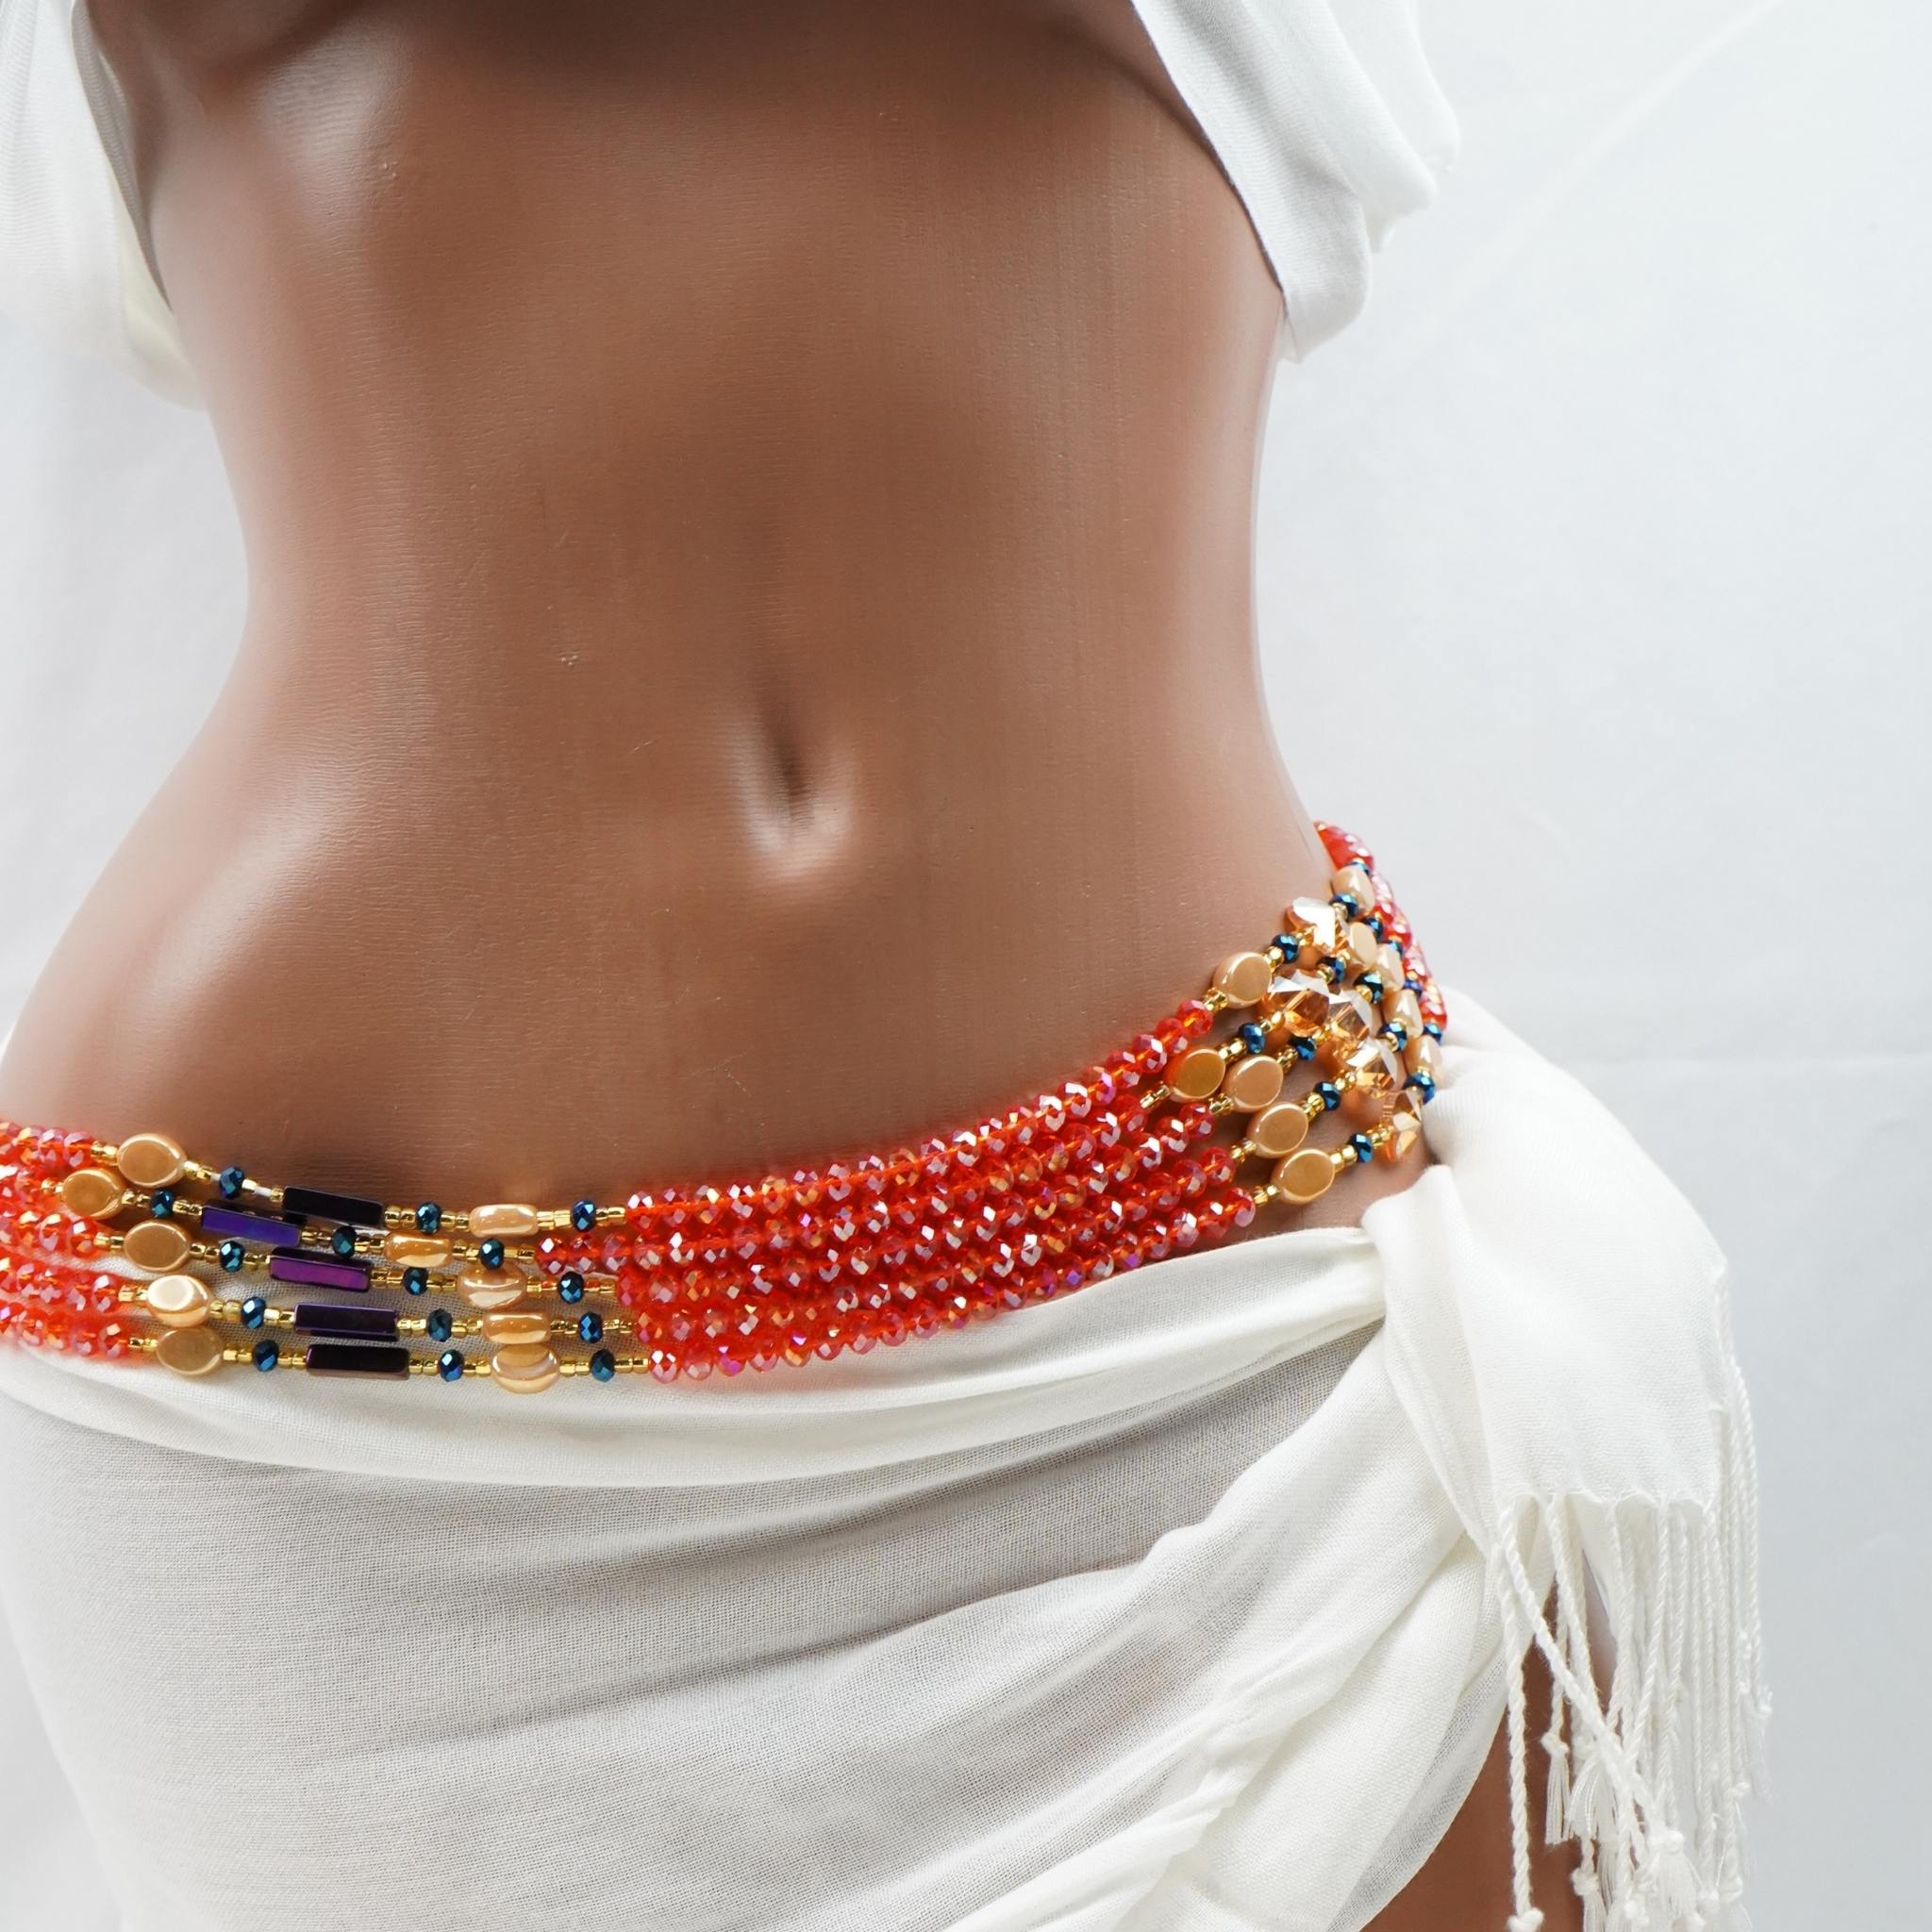 Authentic Waist Beads for Women, African Waist Beads, 45 Inches Crystals Waist  Beads , Belly Beads SALE 